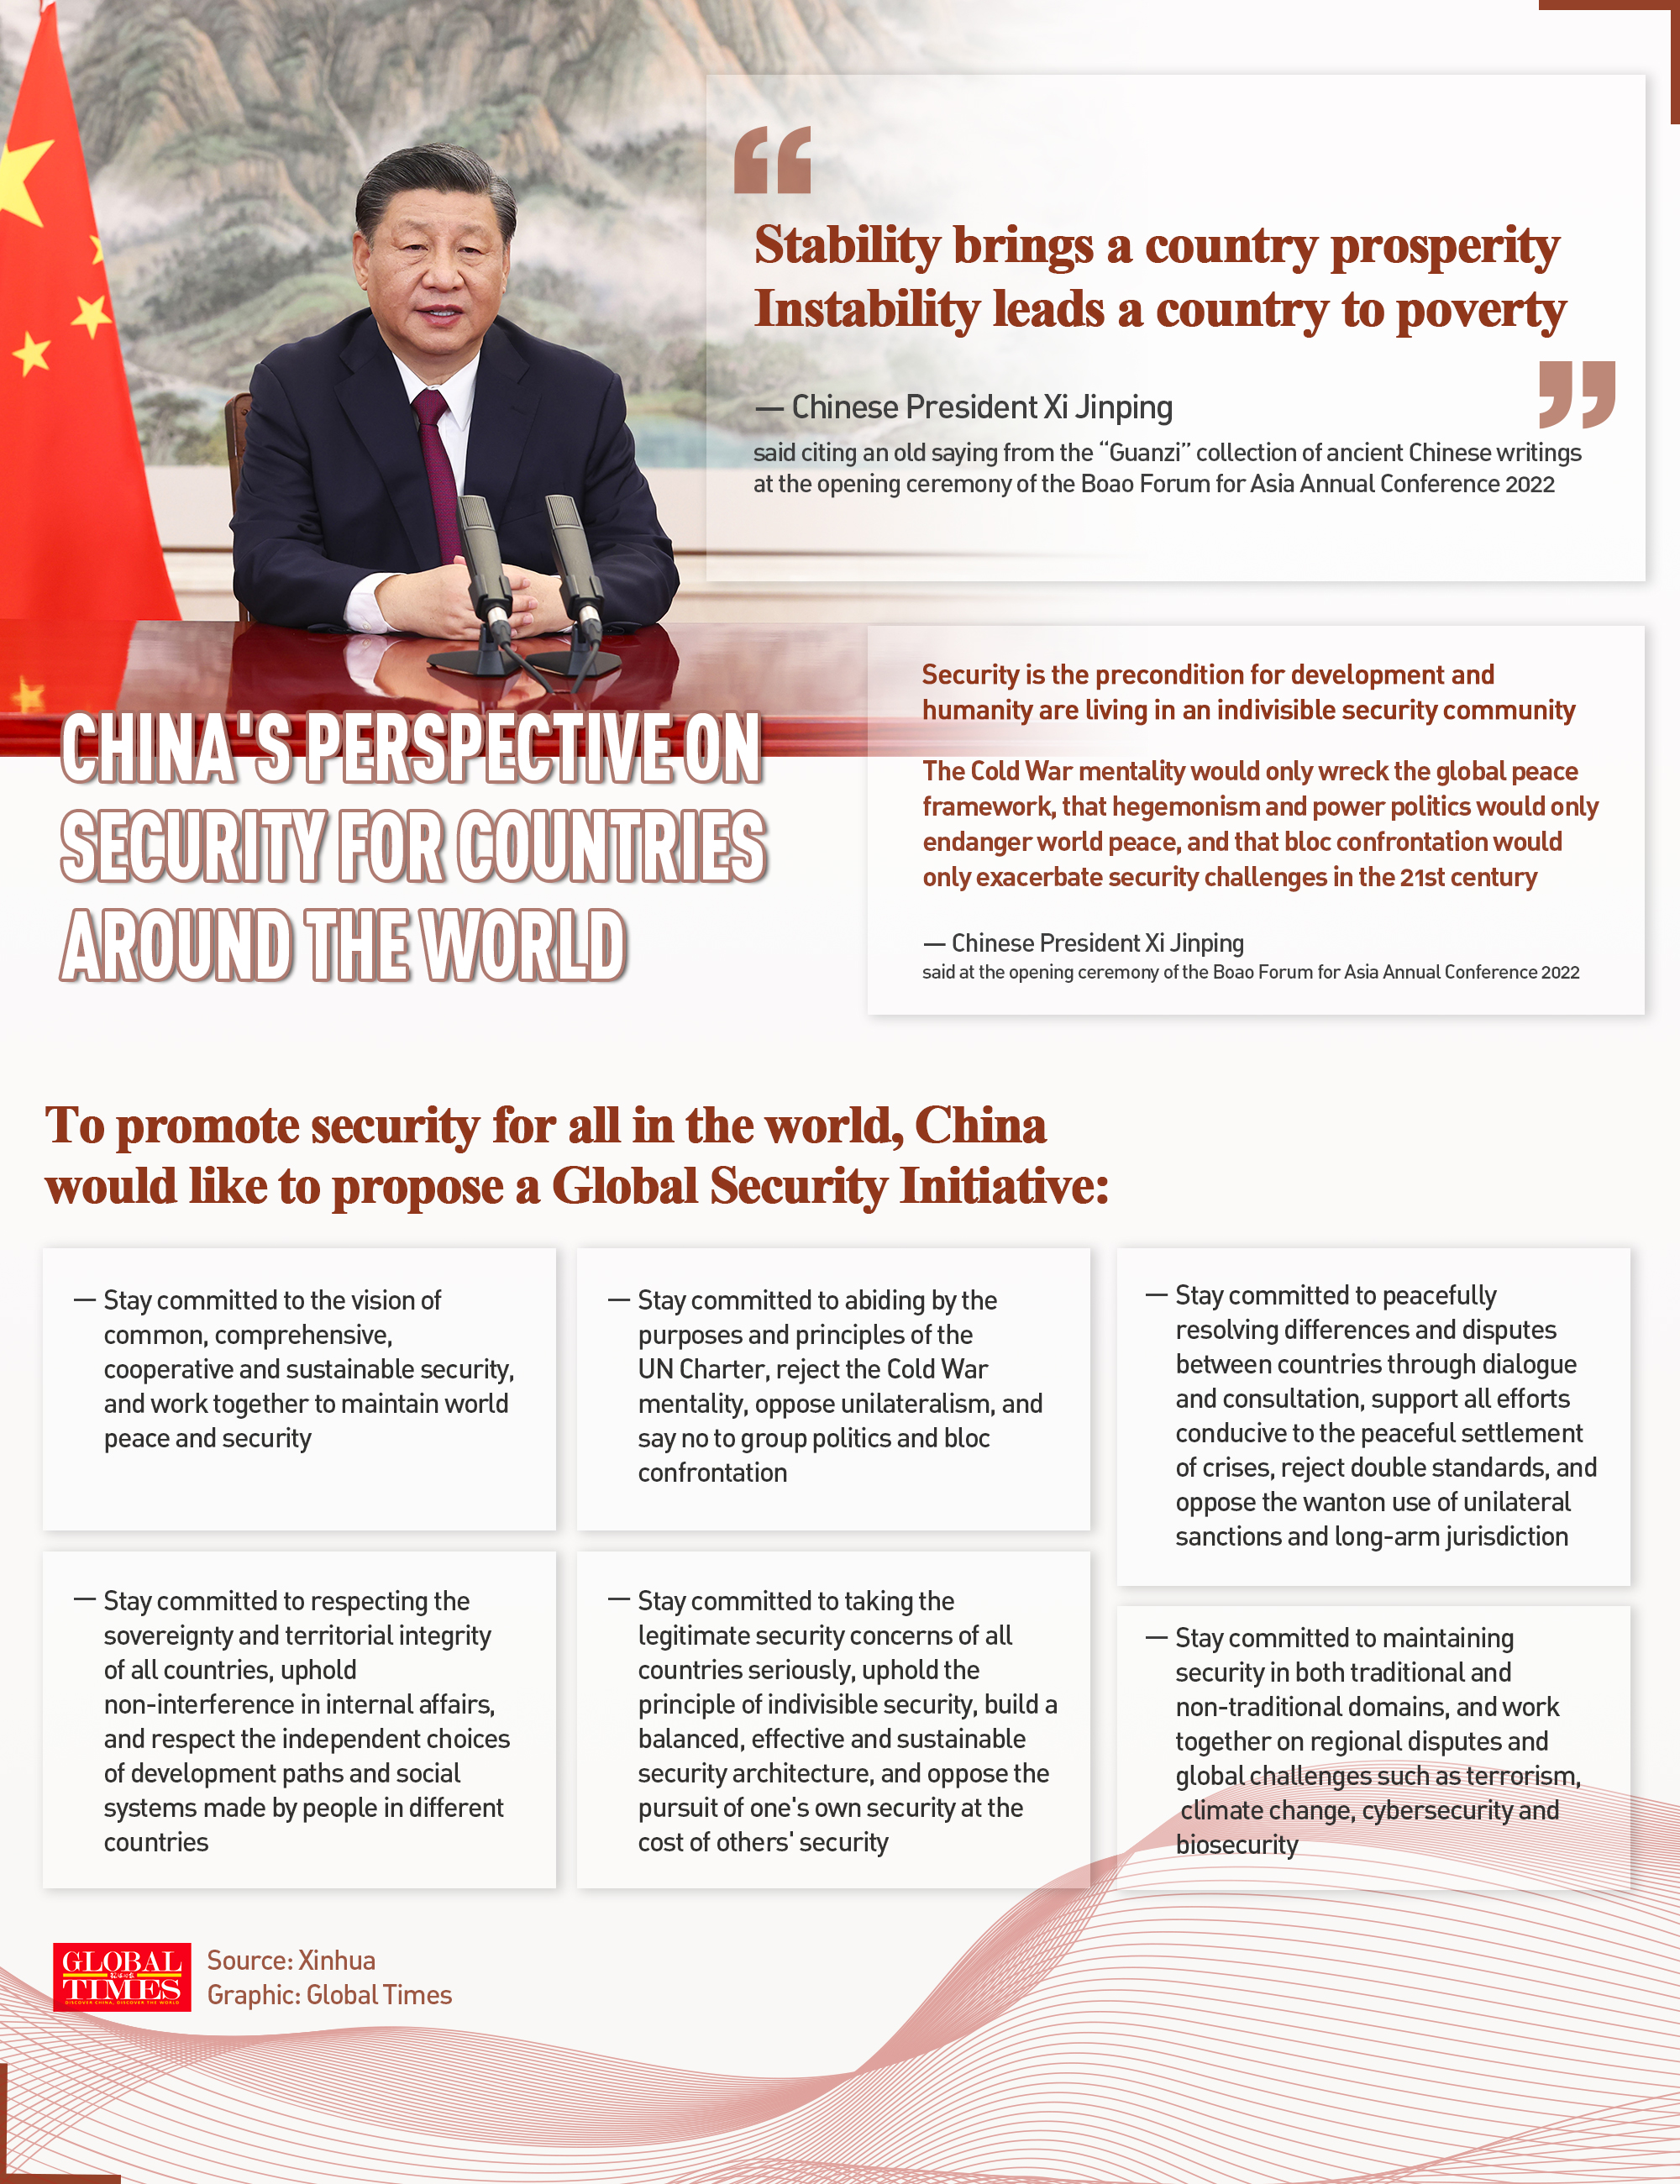 China's perspective on security for countries in the world. Graphic: GT